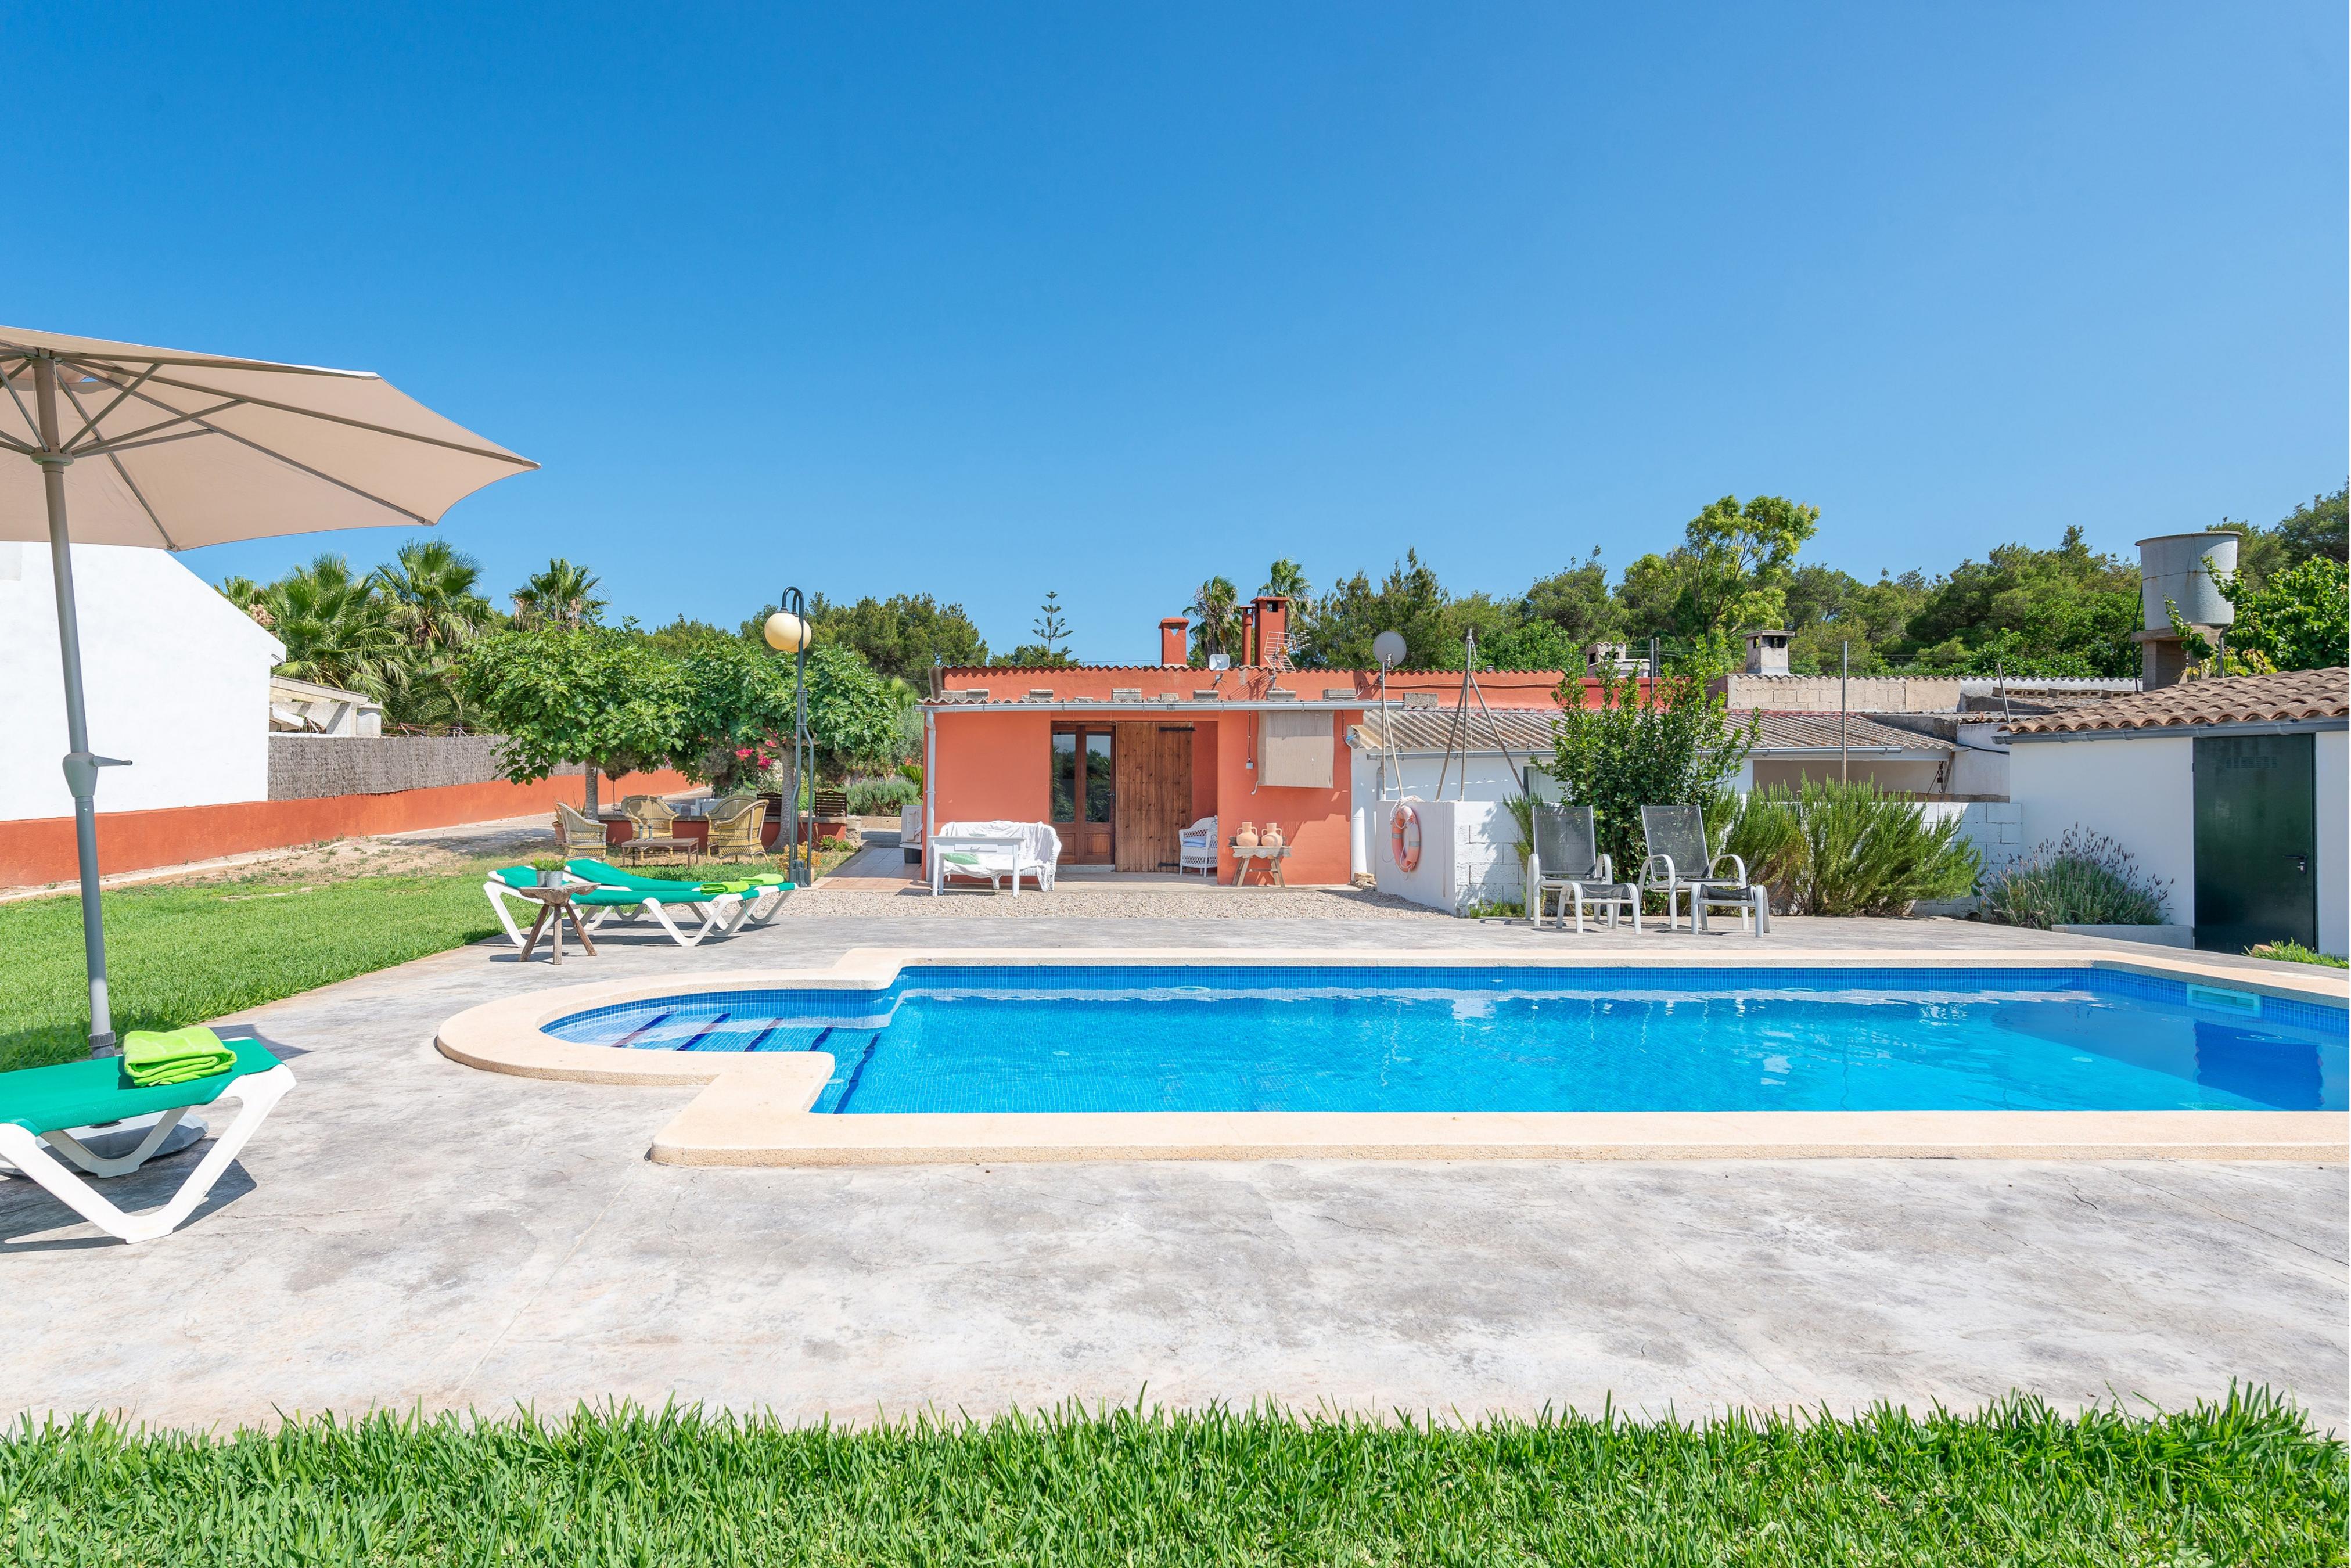 Property Image 2 - CAN CALAFAT - Villa with private pool near the beach. Free WiFi